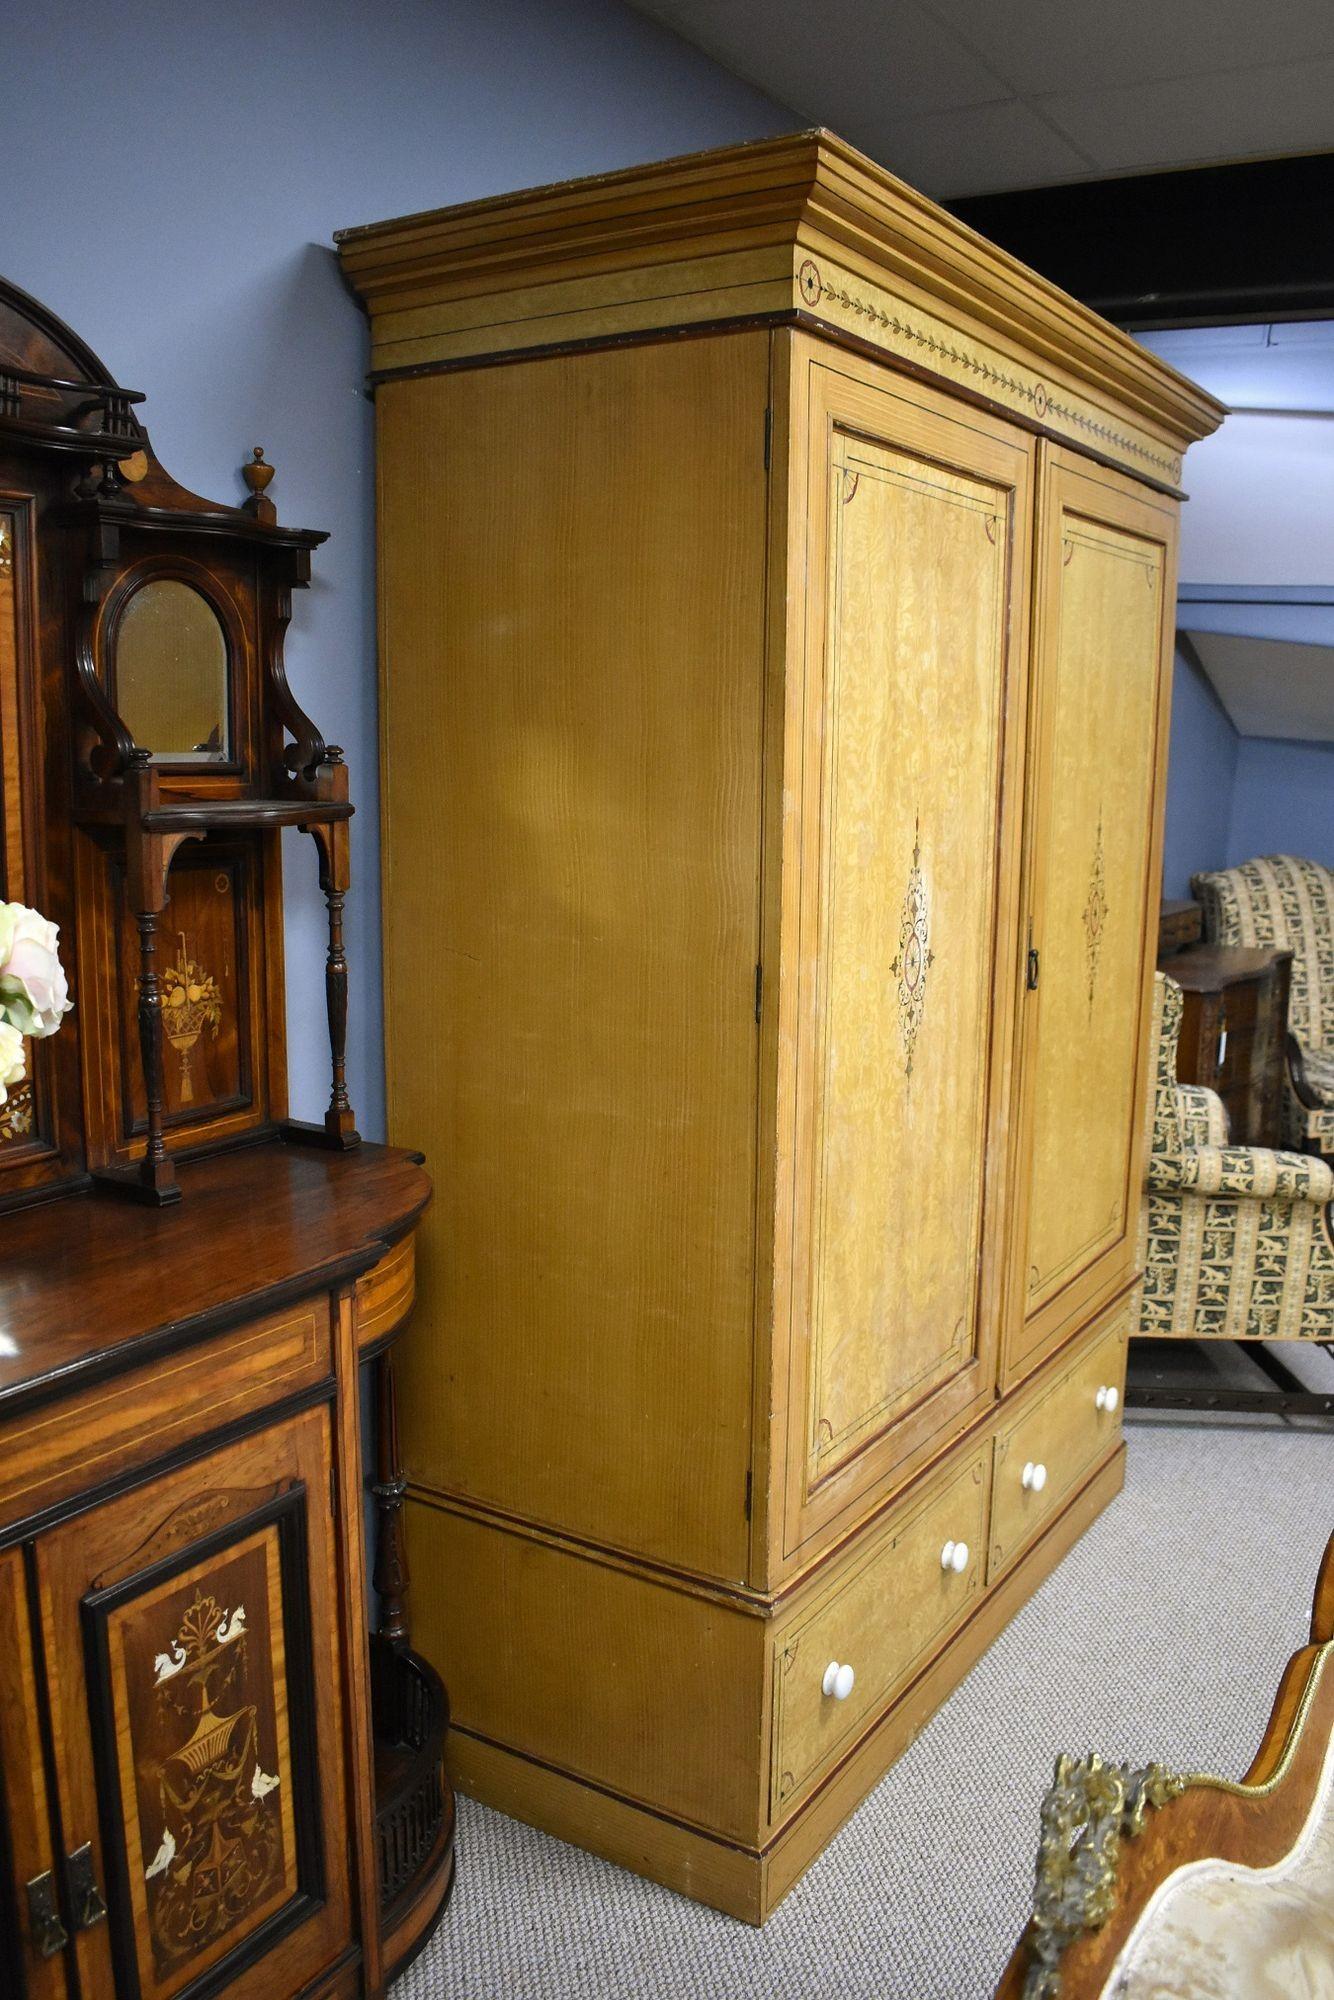 For sale is a good quality Victorian ash two door wardrobe, opening to removable shelves or ample hanging space, with two drawers below, each retaining their original handles. The wardrobe stands on a plinth base and is in good condition showing